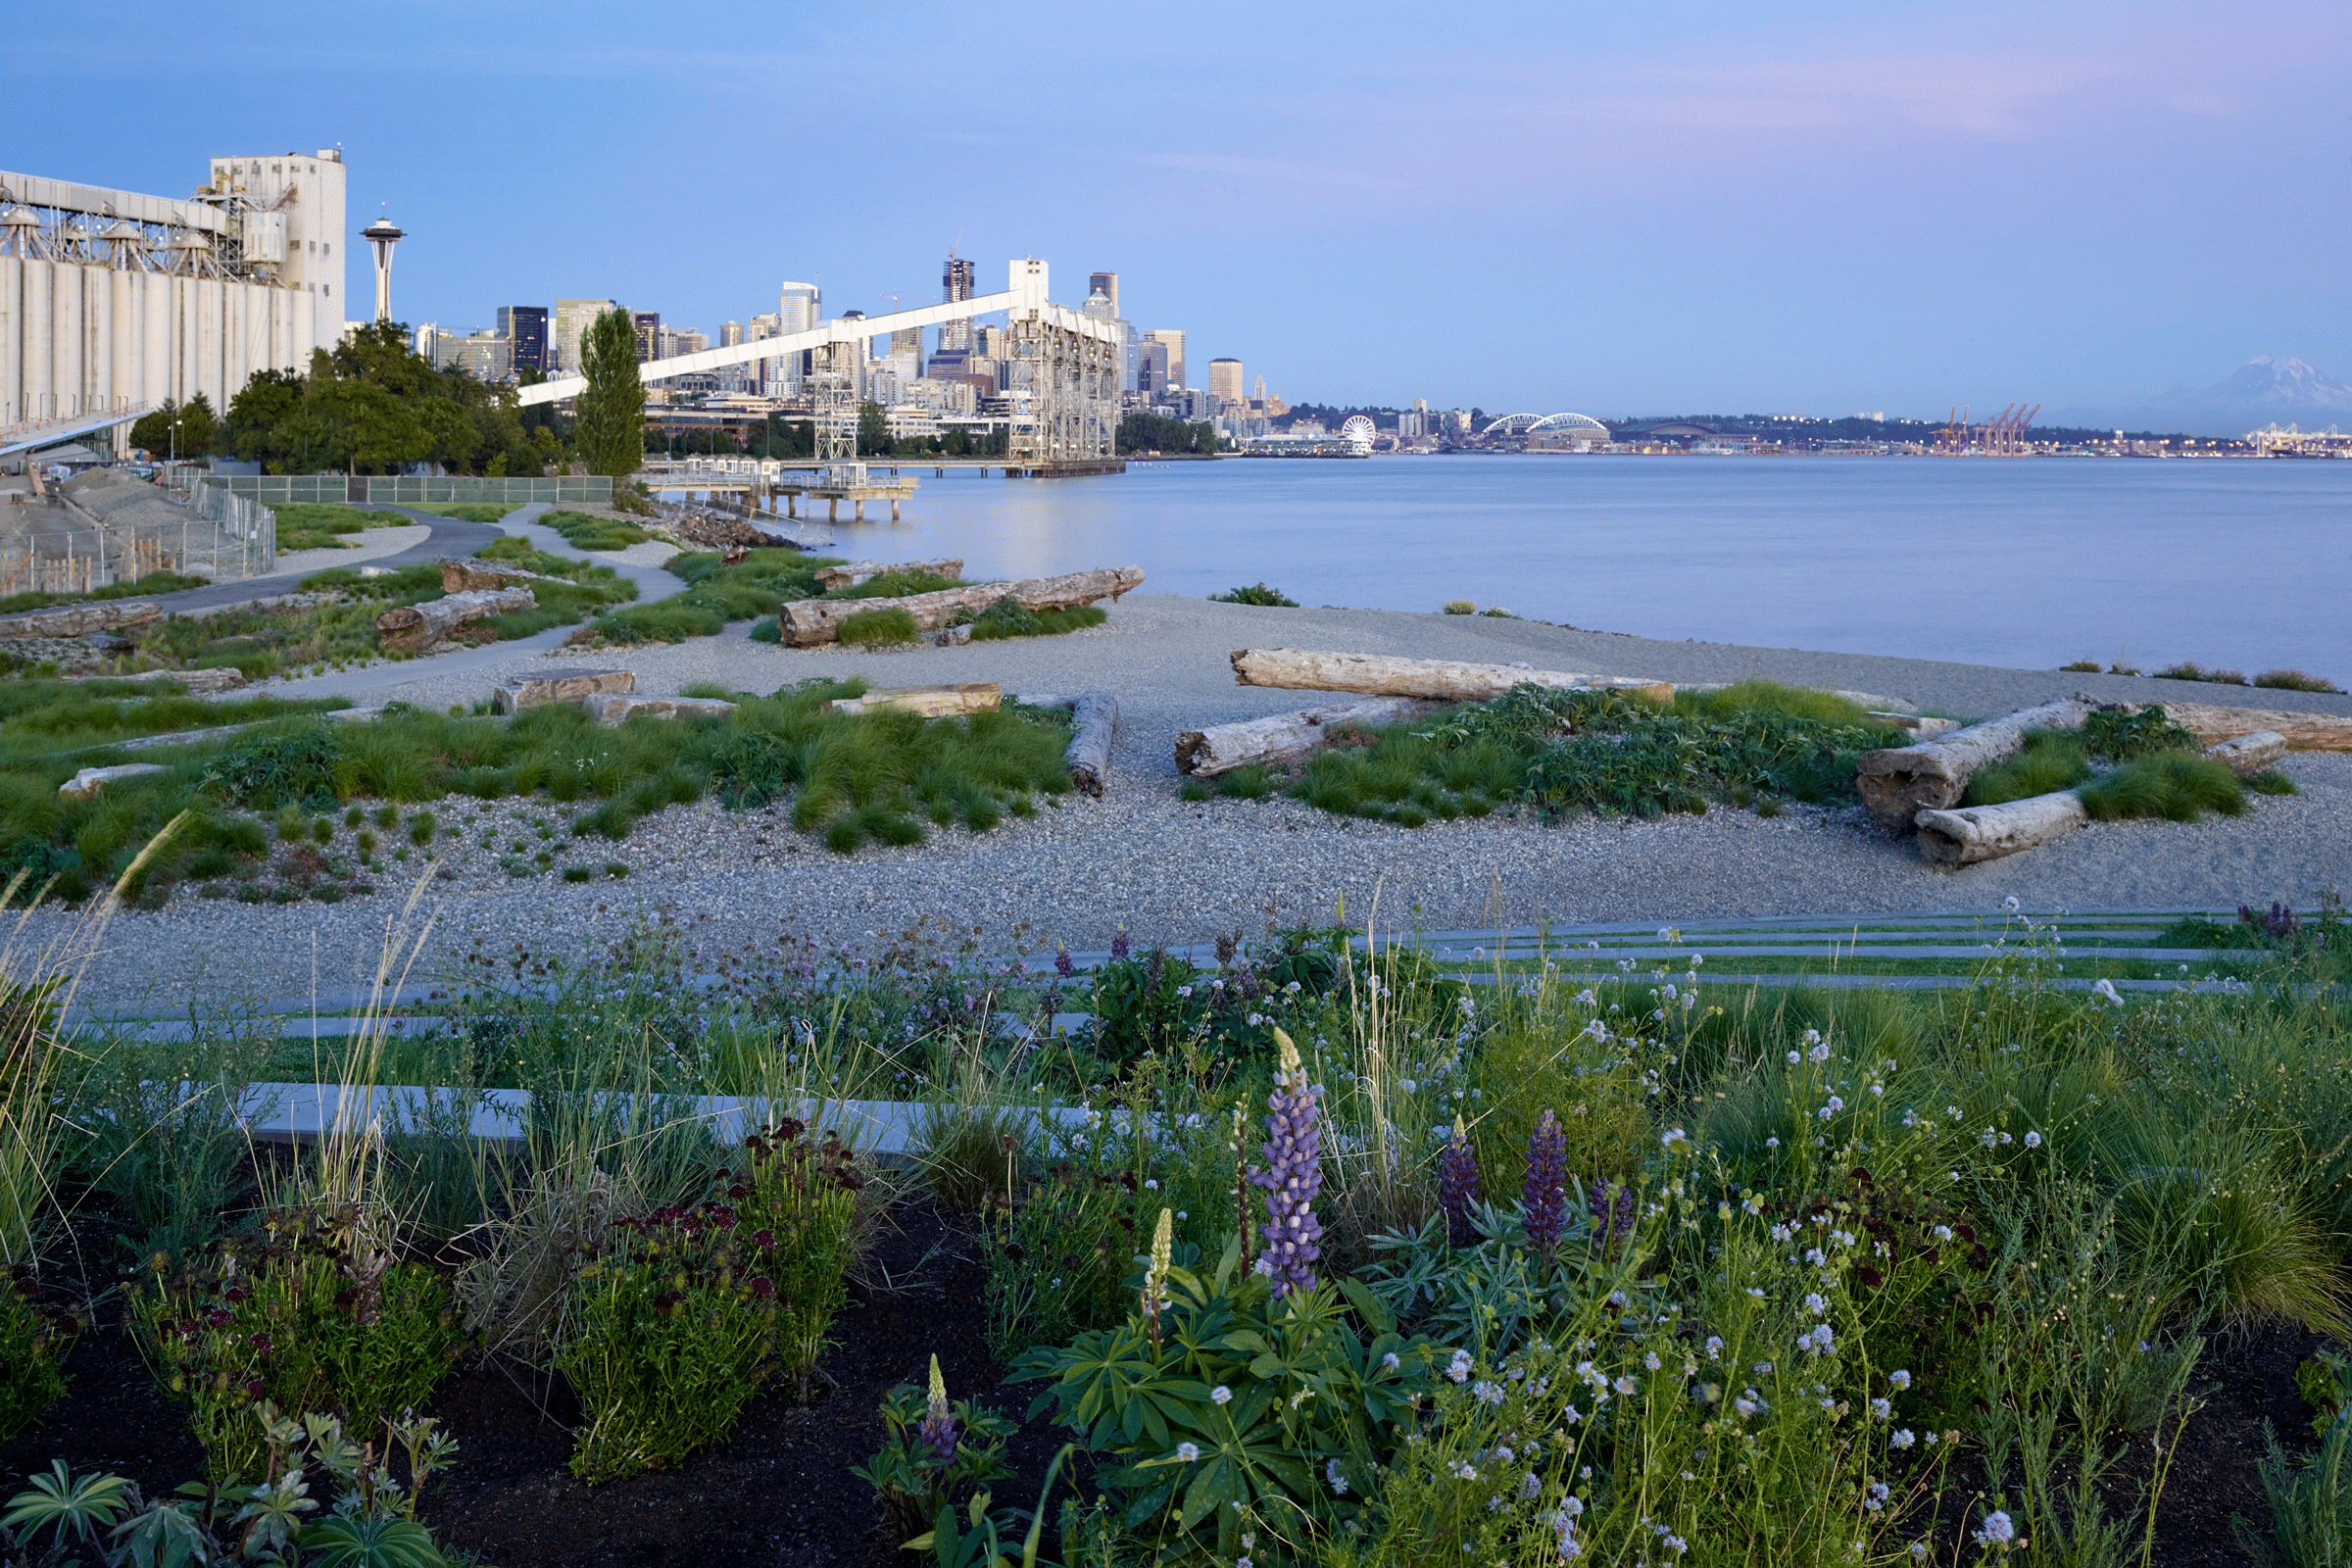 Designing Landscapes to Last: Surfacedesign’s Waterfront Seattle Park